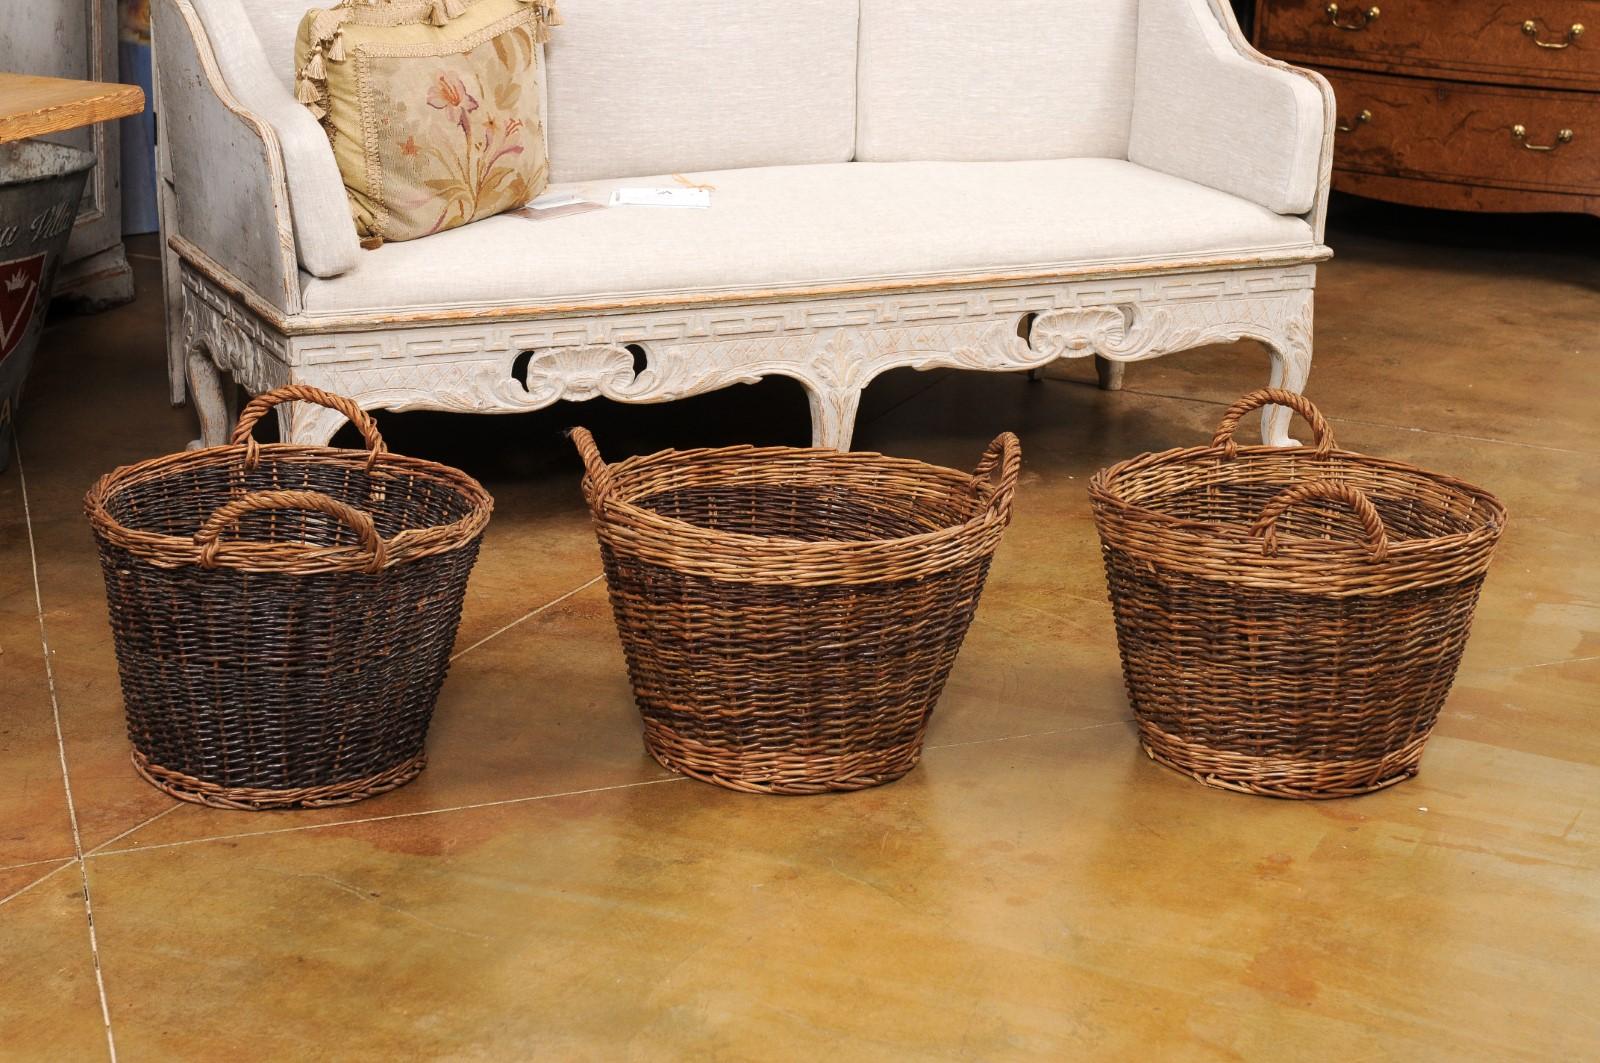 Handmade English Two Toned Wicker Baskets from Devon with Double Handles, Each 1